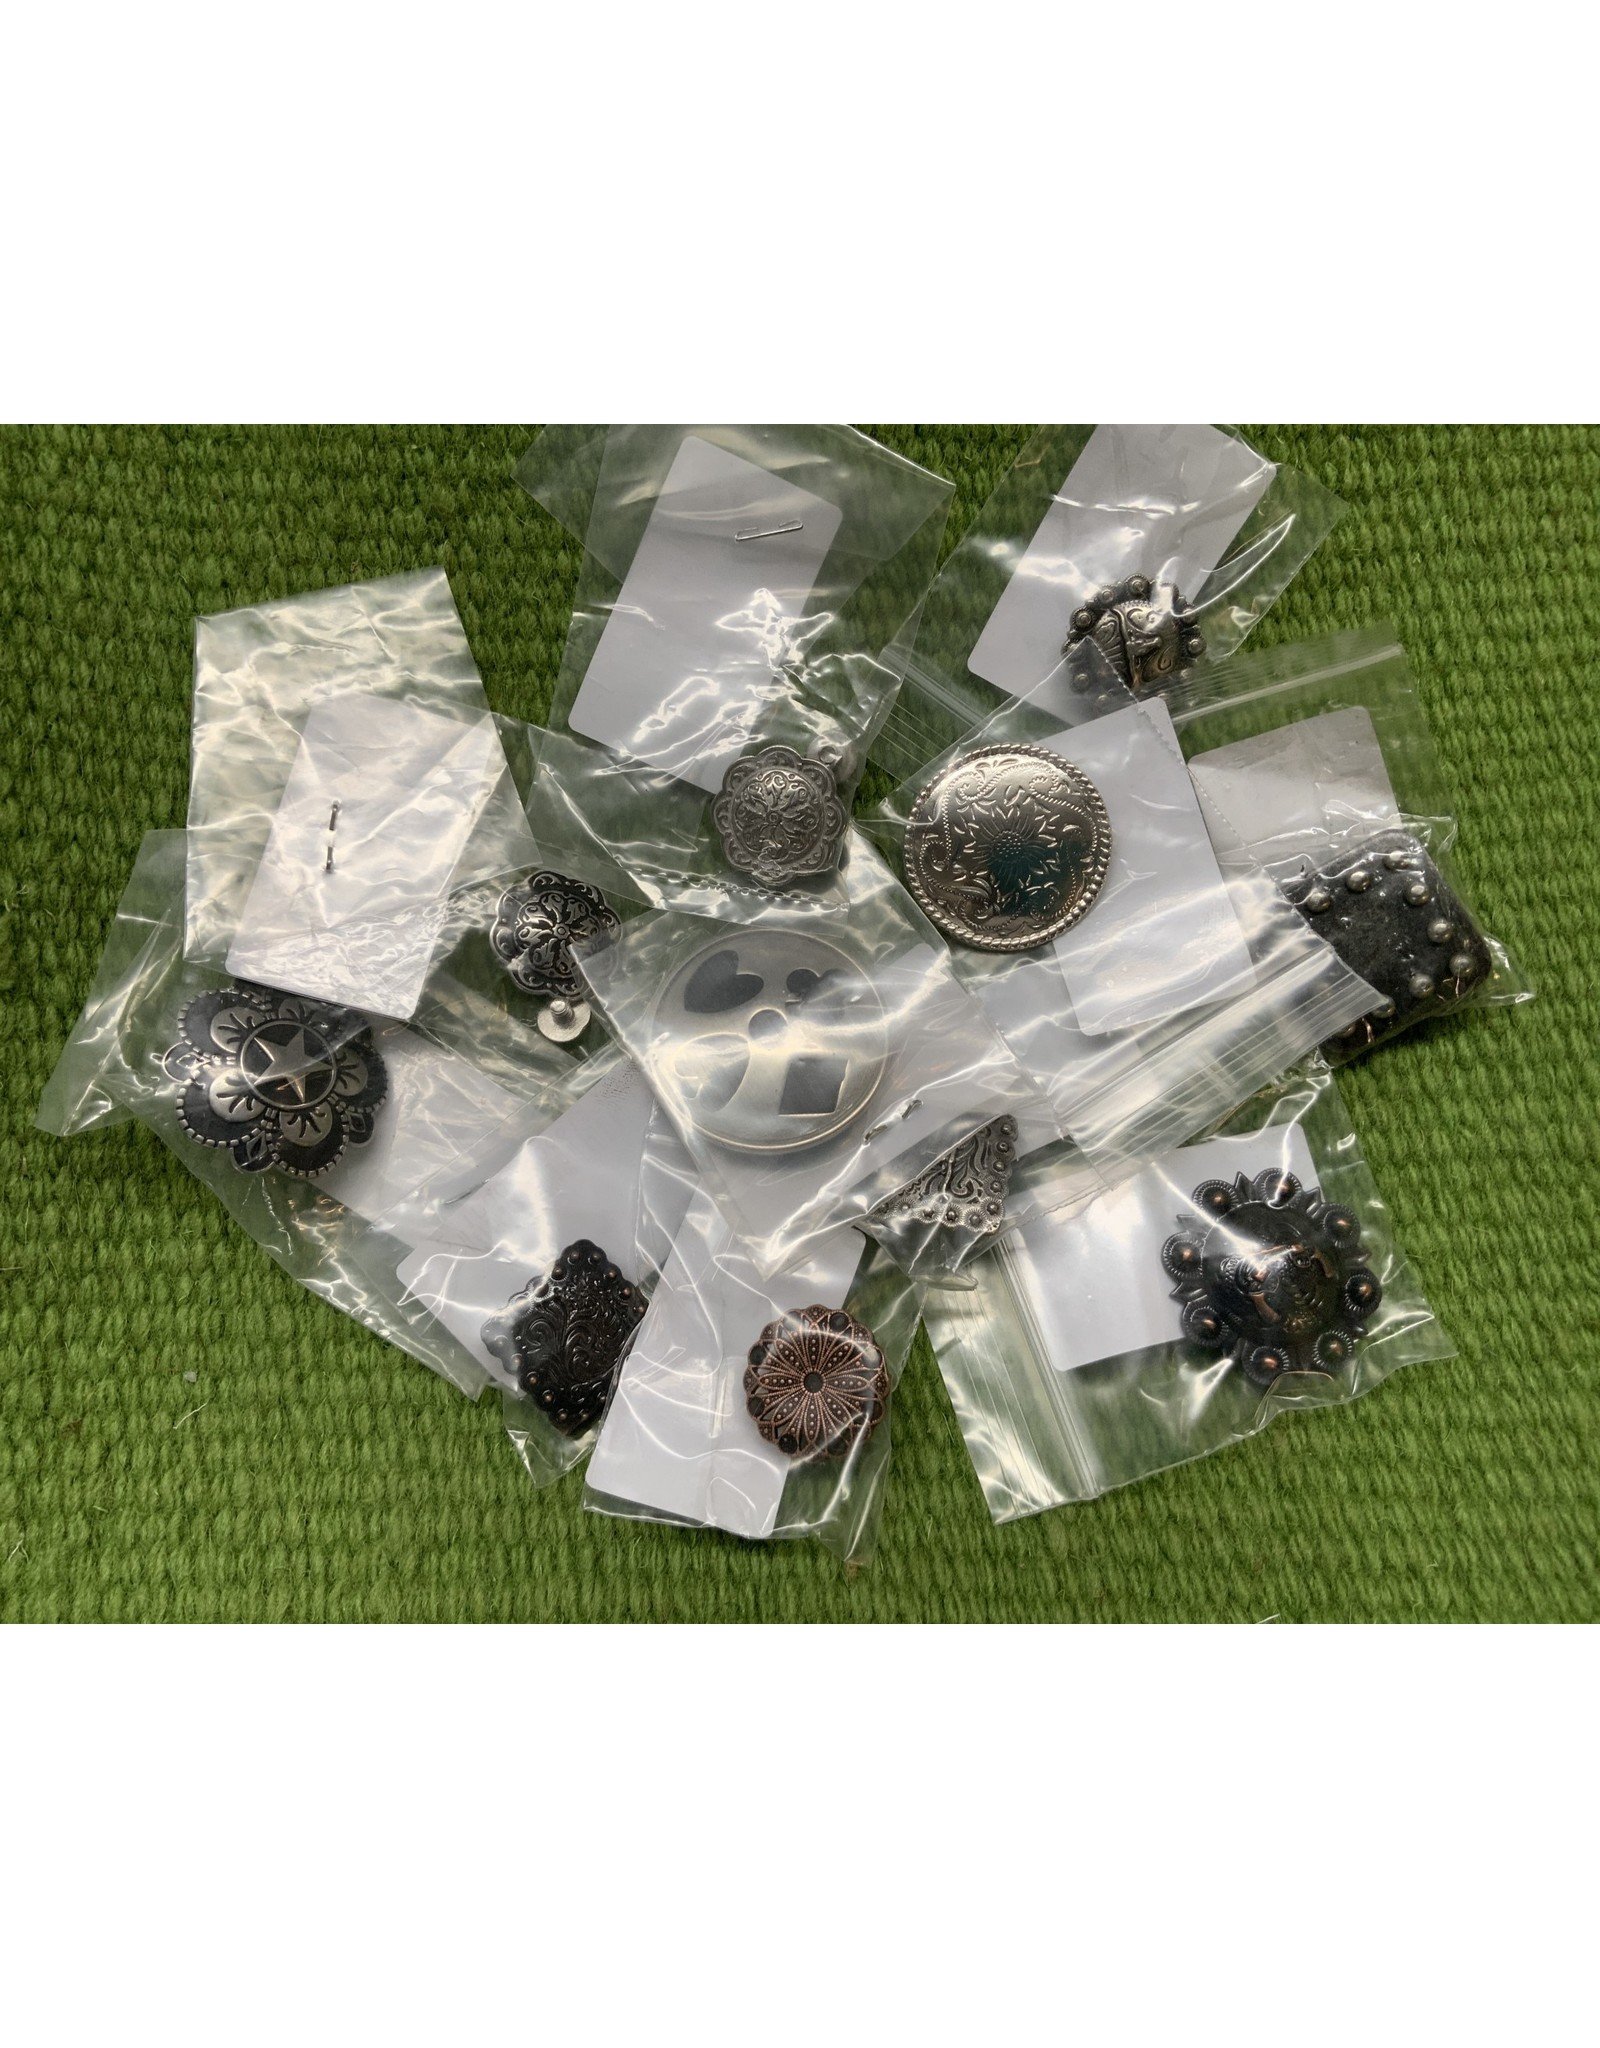 CONCHOS- Variety of Sizes and Designs